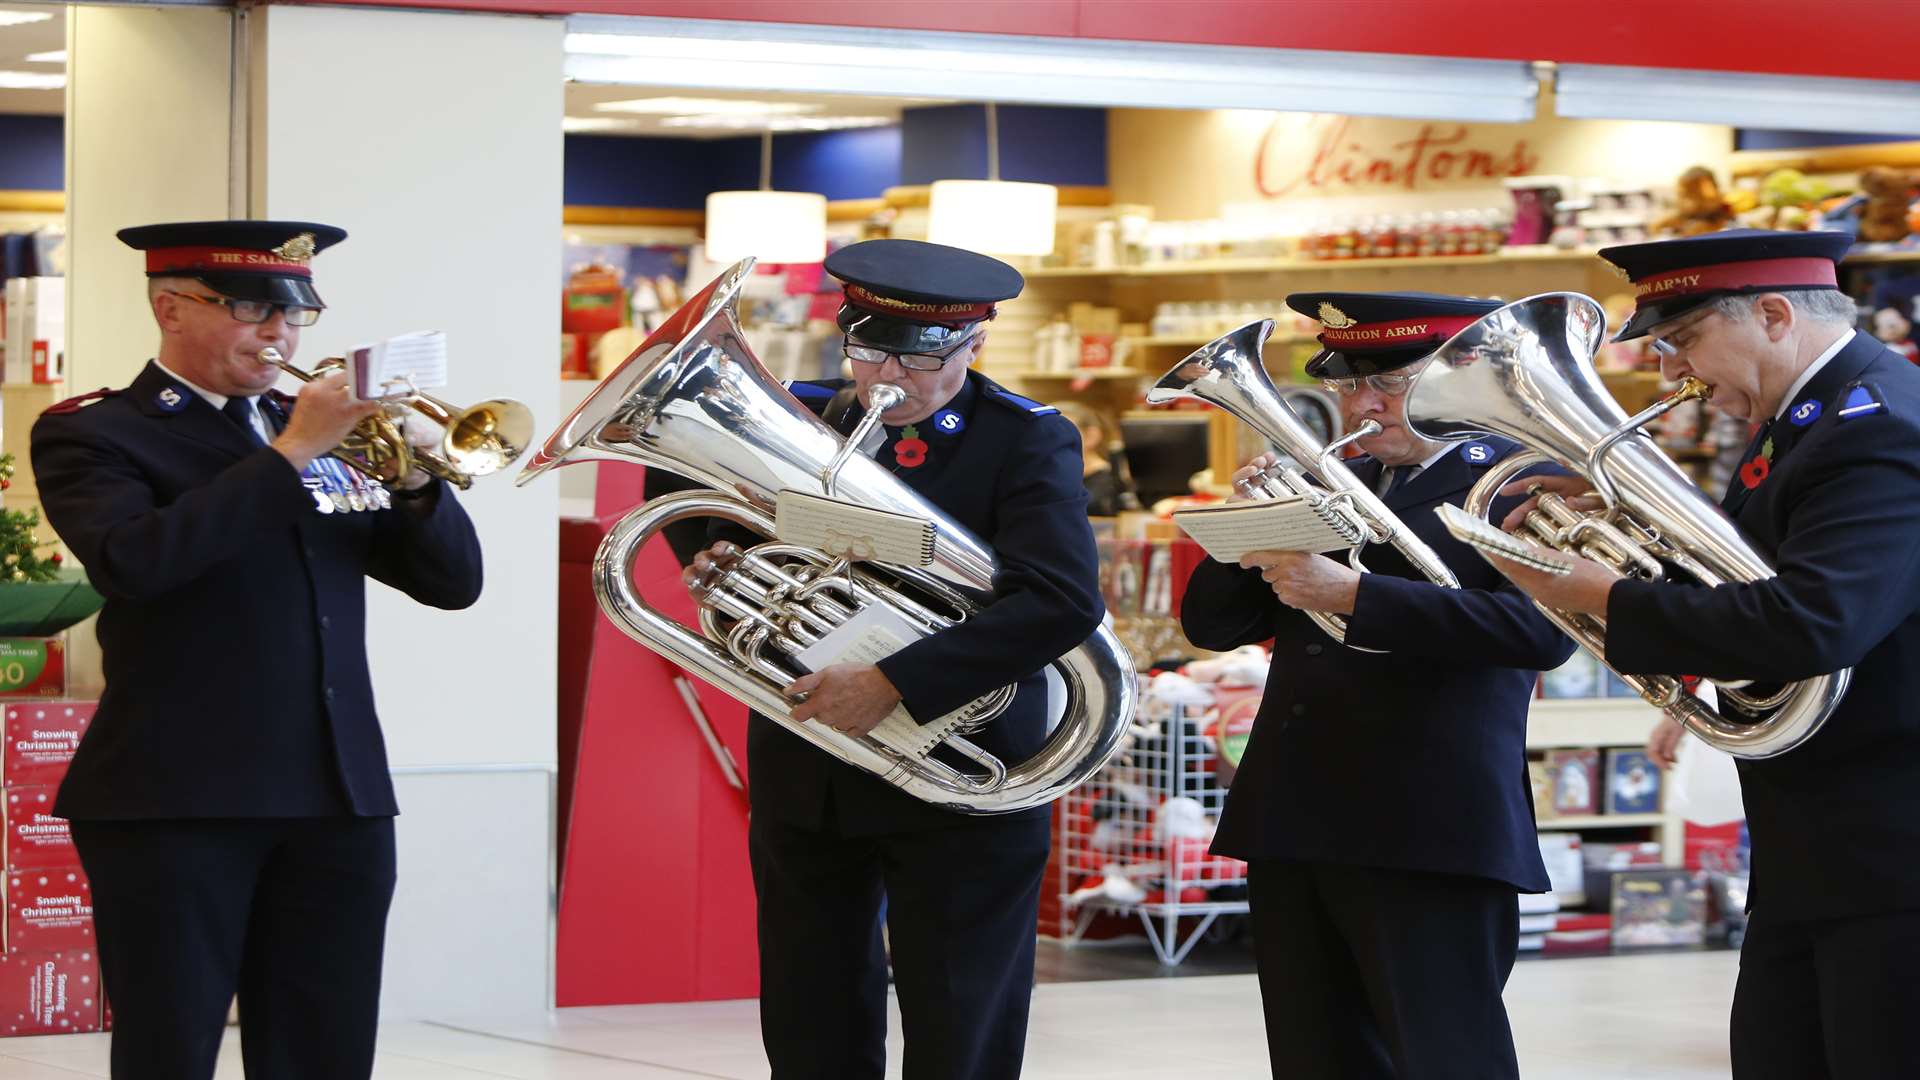 The Salvation Army band accompanied the hymns, and the bugler performed The Last Post as silence fell.